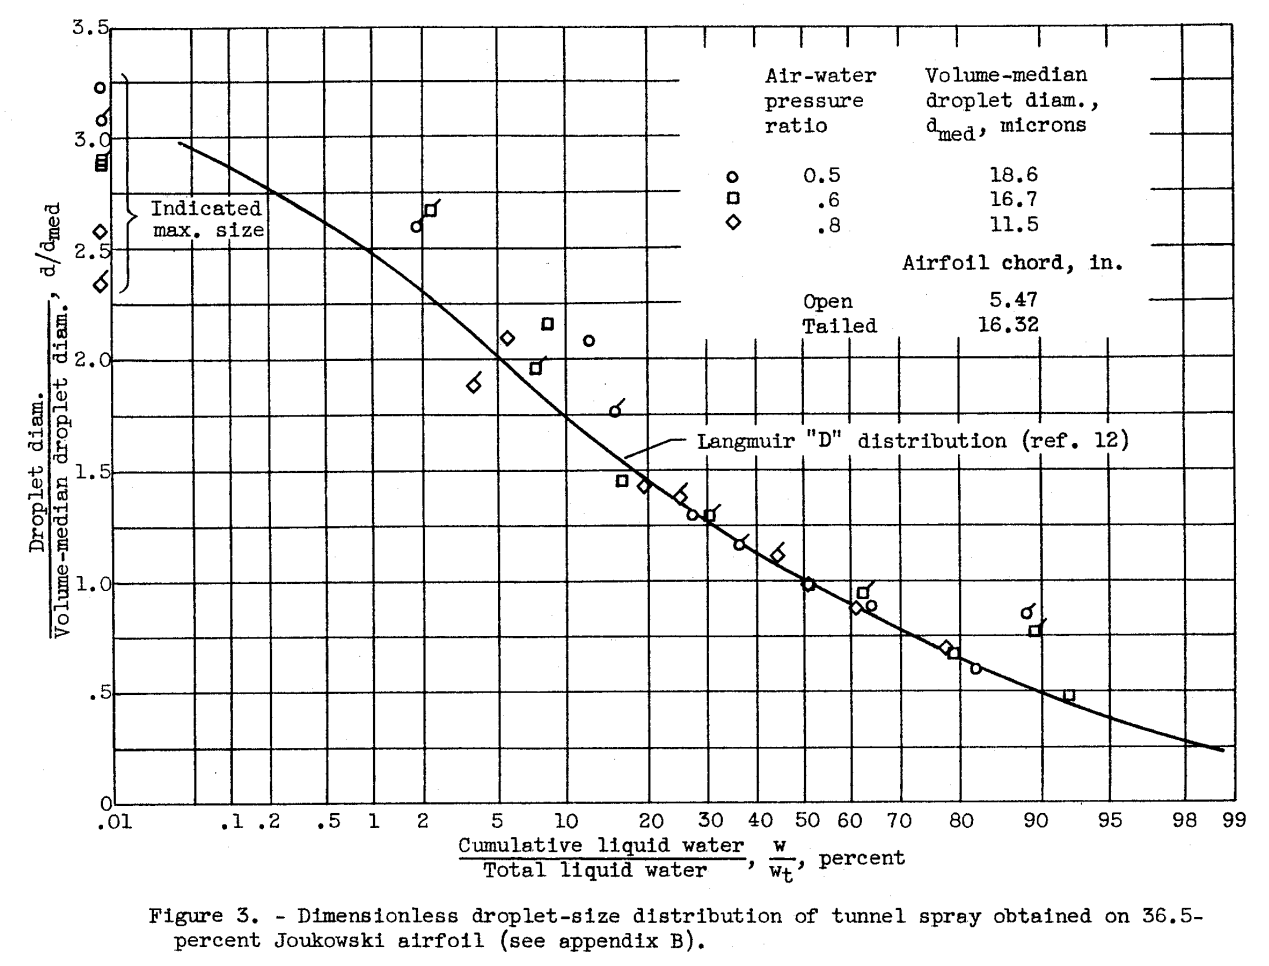 Figure 3 of NACA-TN-3839. Dimensionless droplet-size distribution of tunnel 
spray obtained on 36.5 percent Joukowski airfoil (see Appendix B).